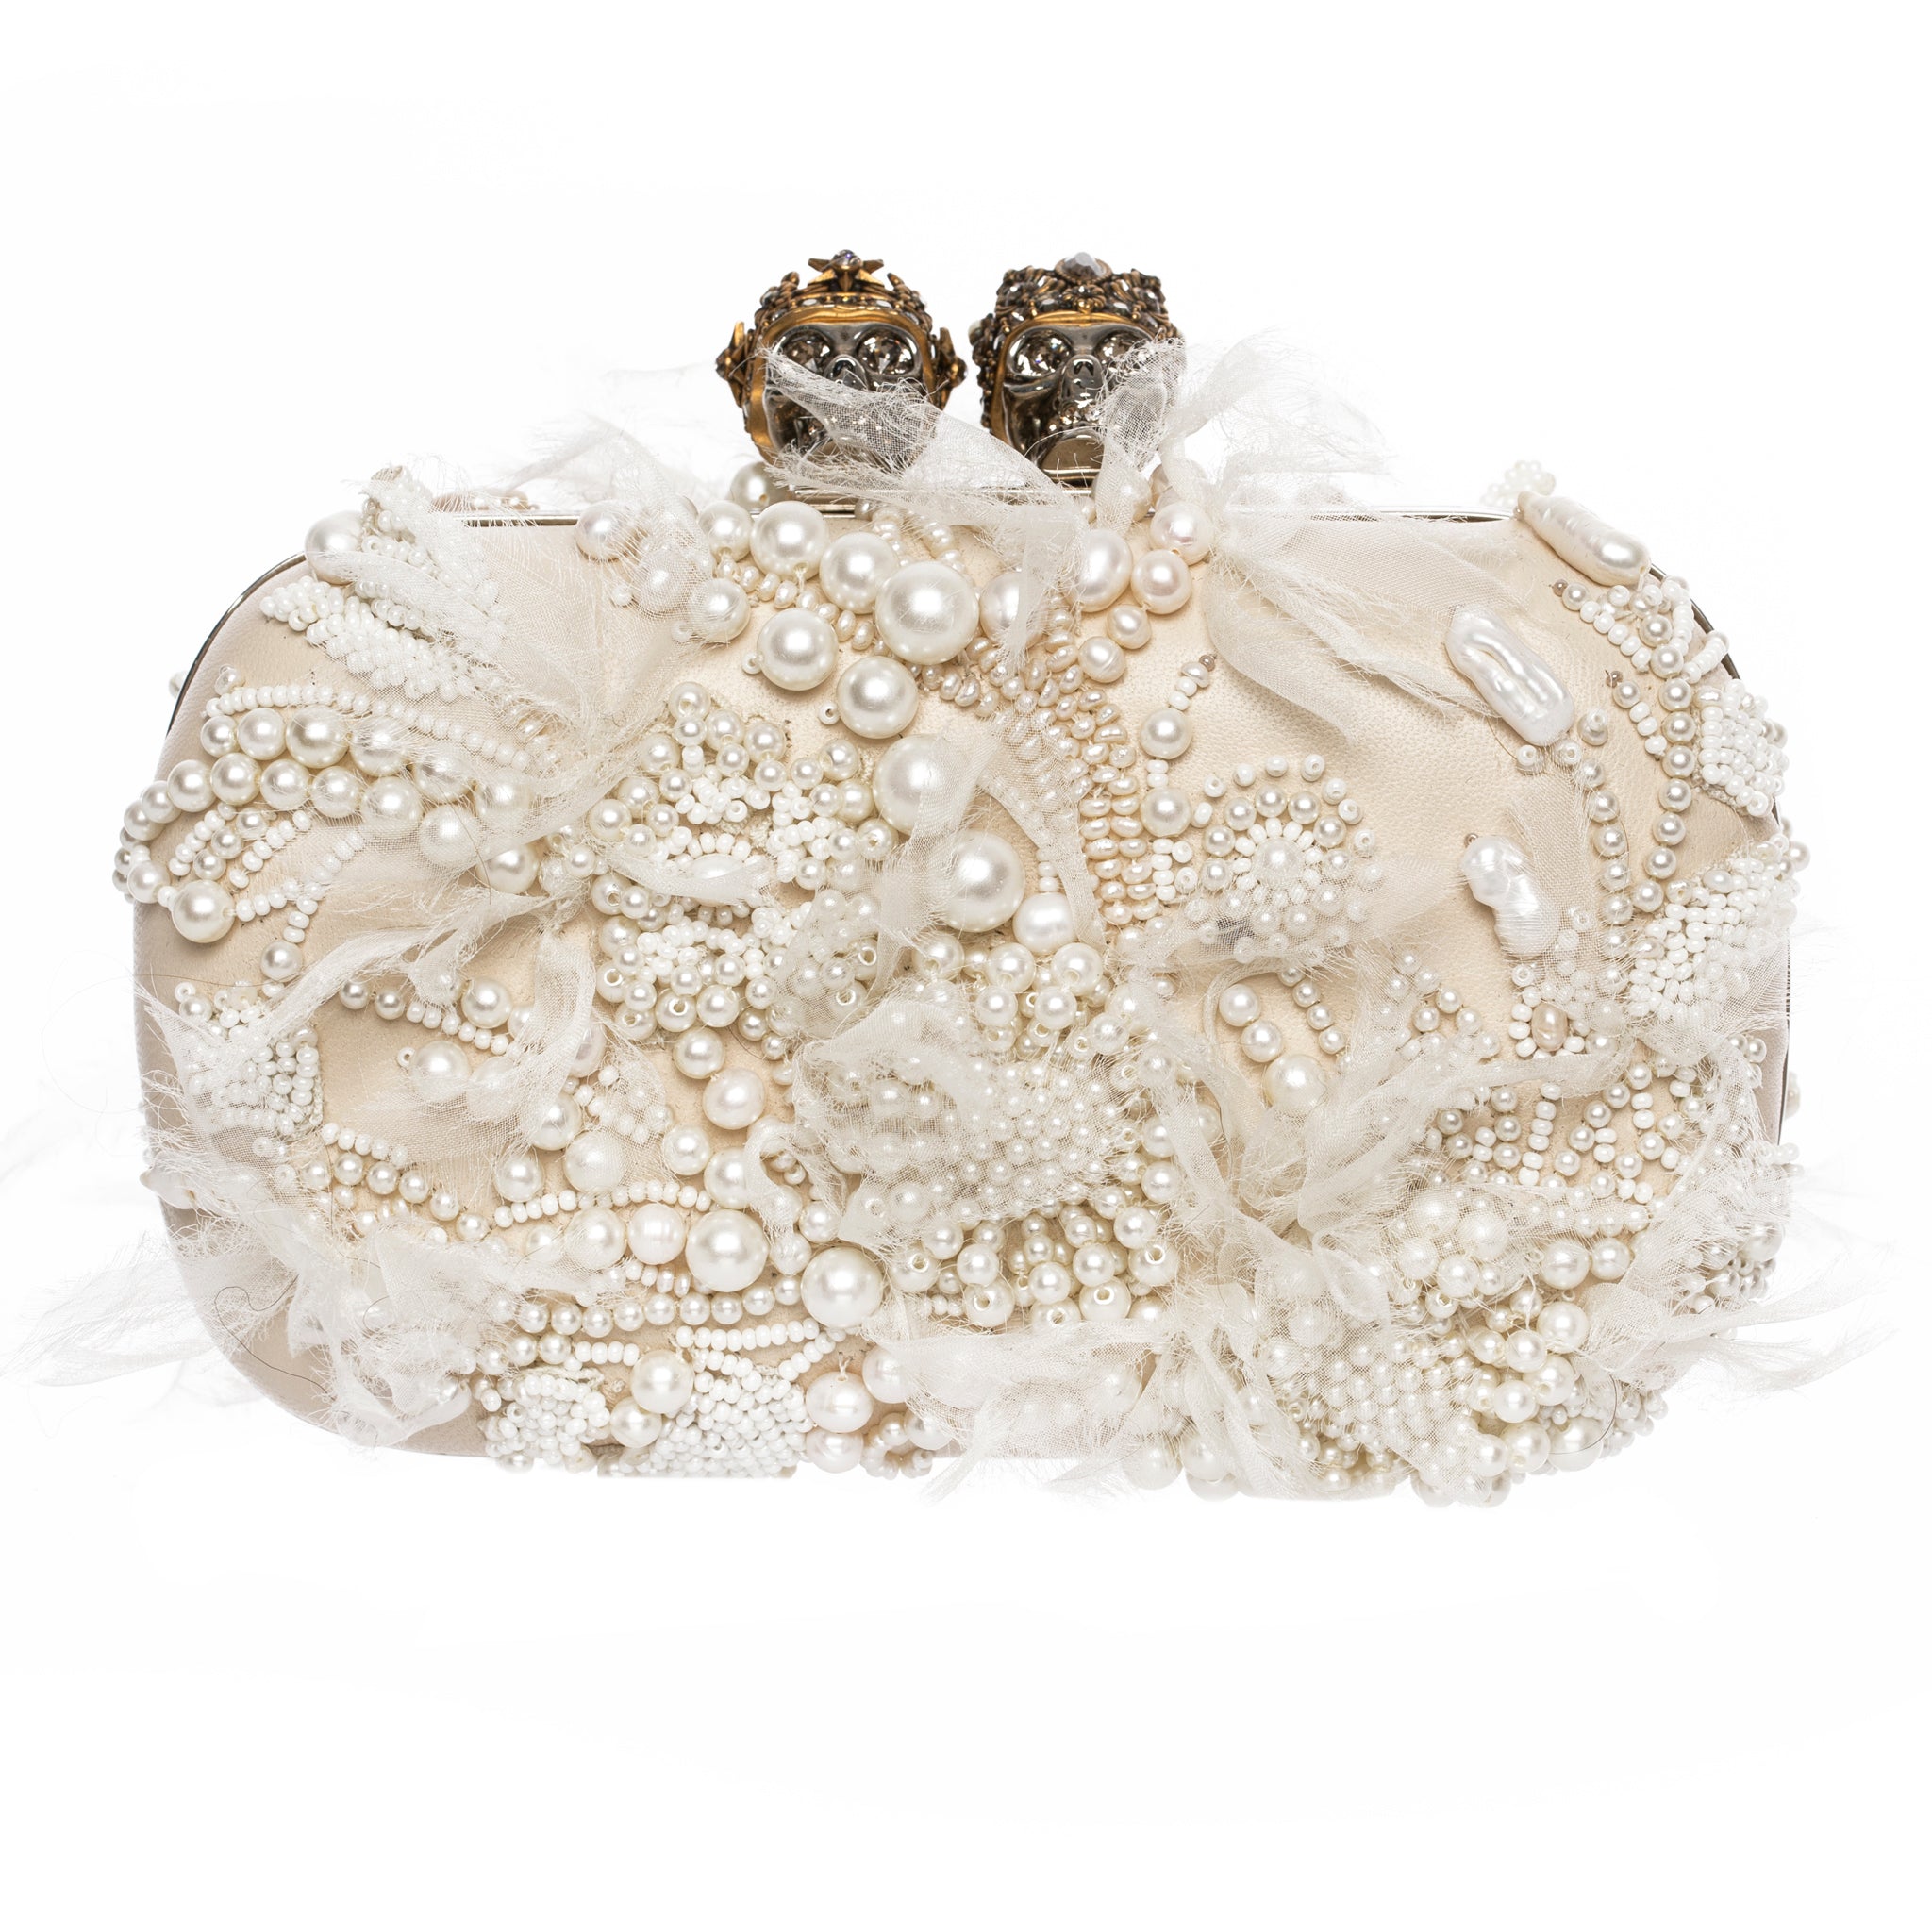 Alexander McQueen Queen & King Ivory Leather, Pearl, Crystal & Silk Clutch Silver Tone Hardware